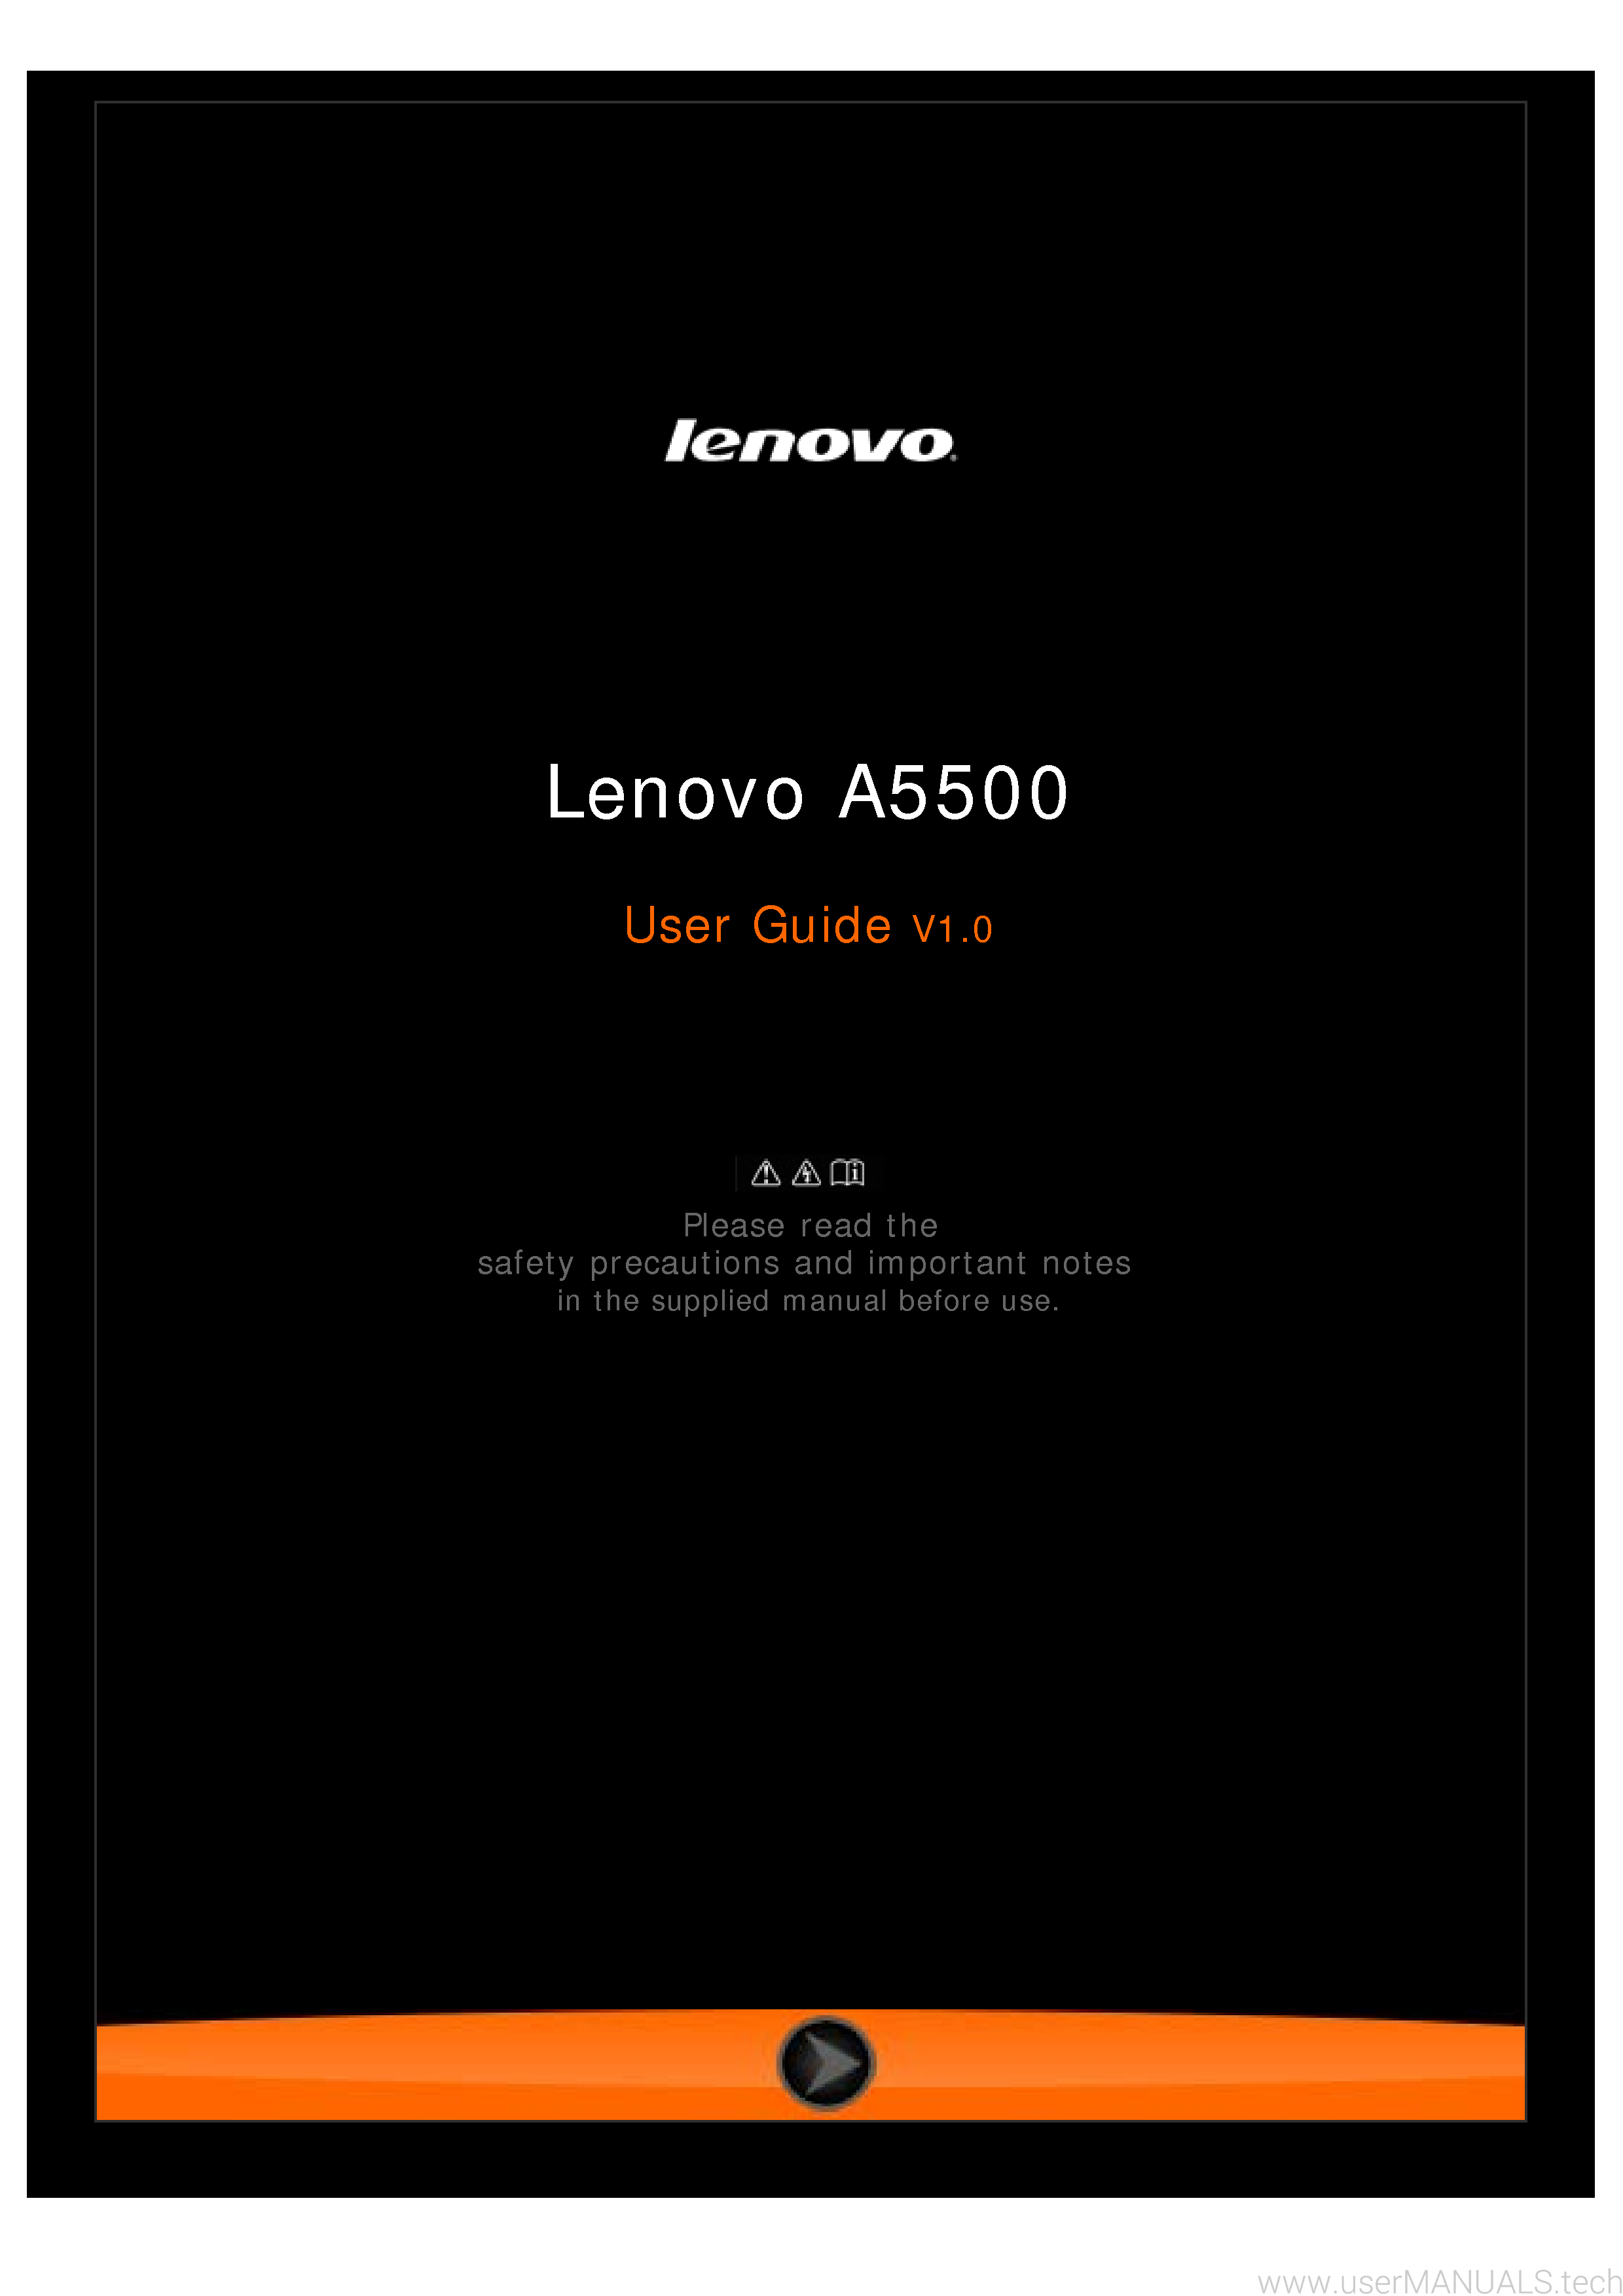 how to download zoom app in lenovo laptop